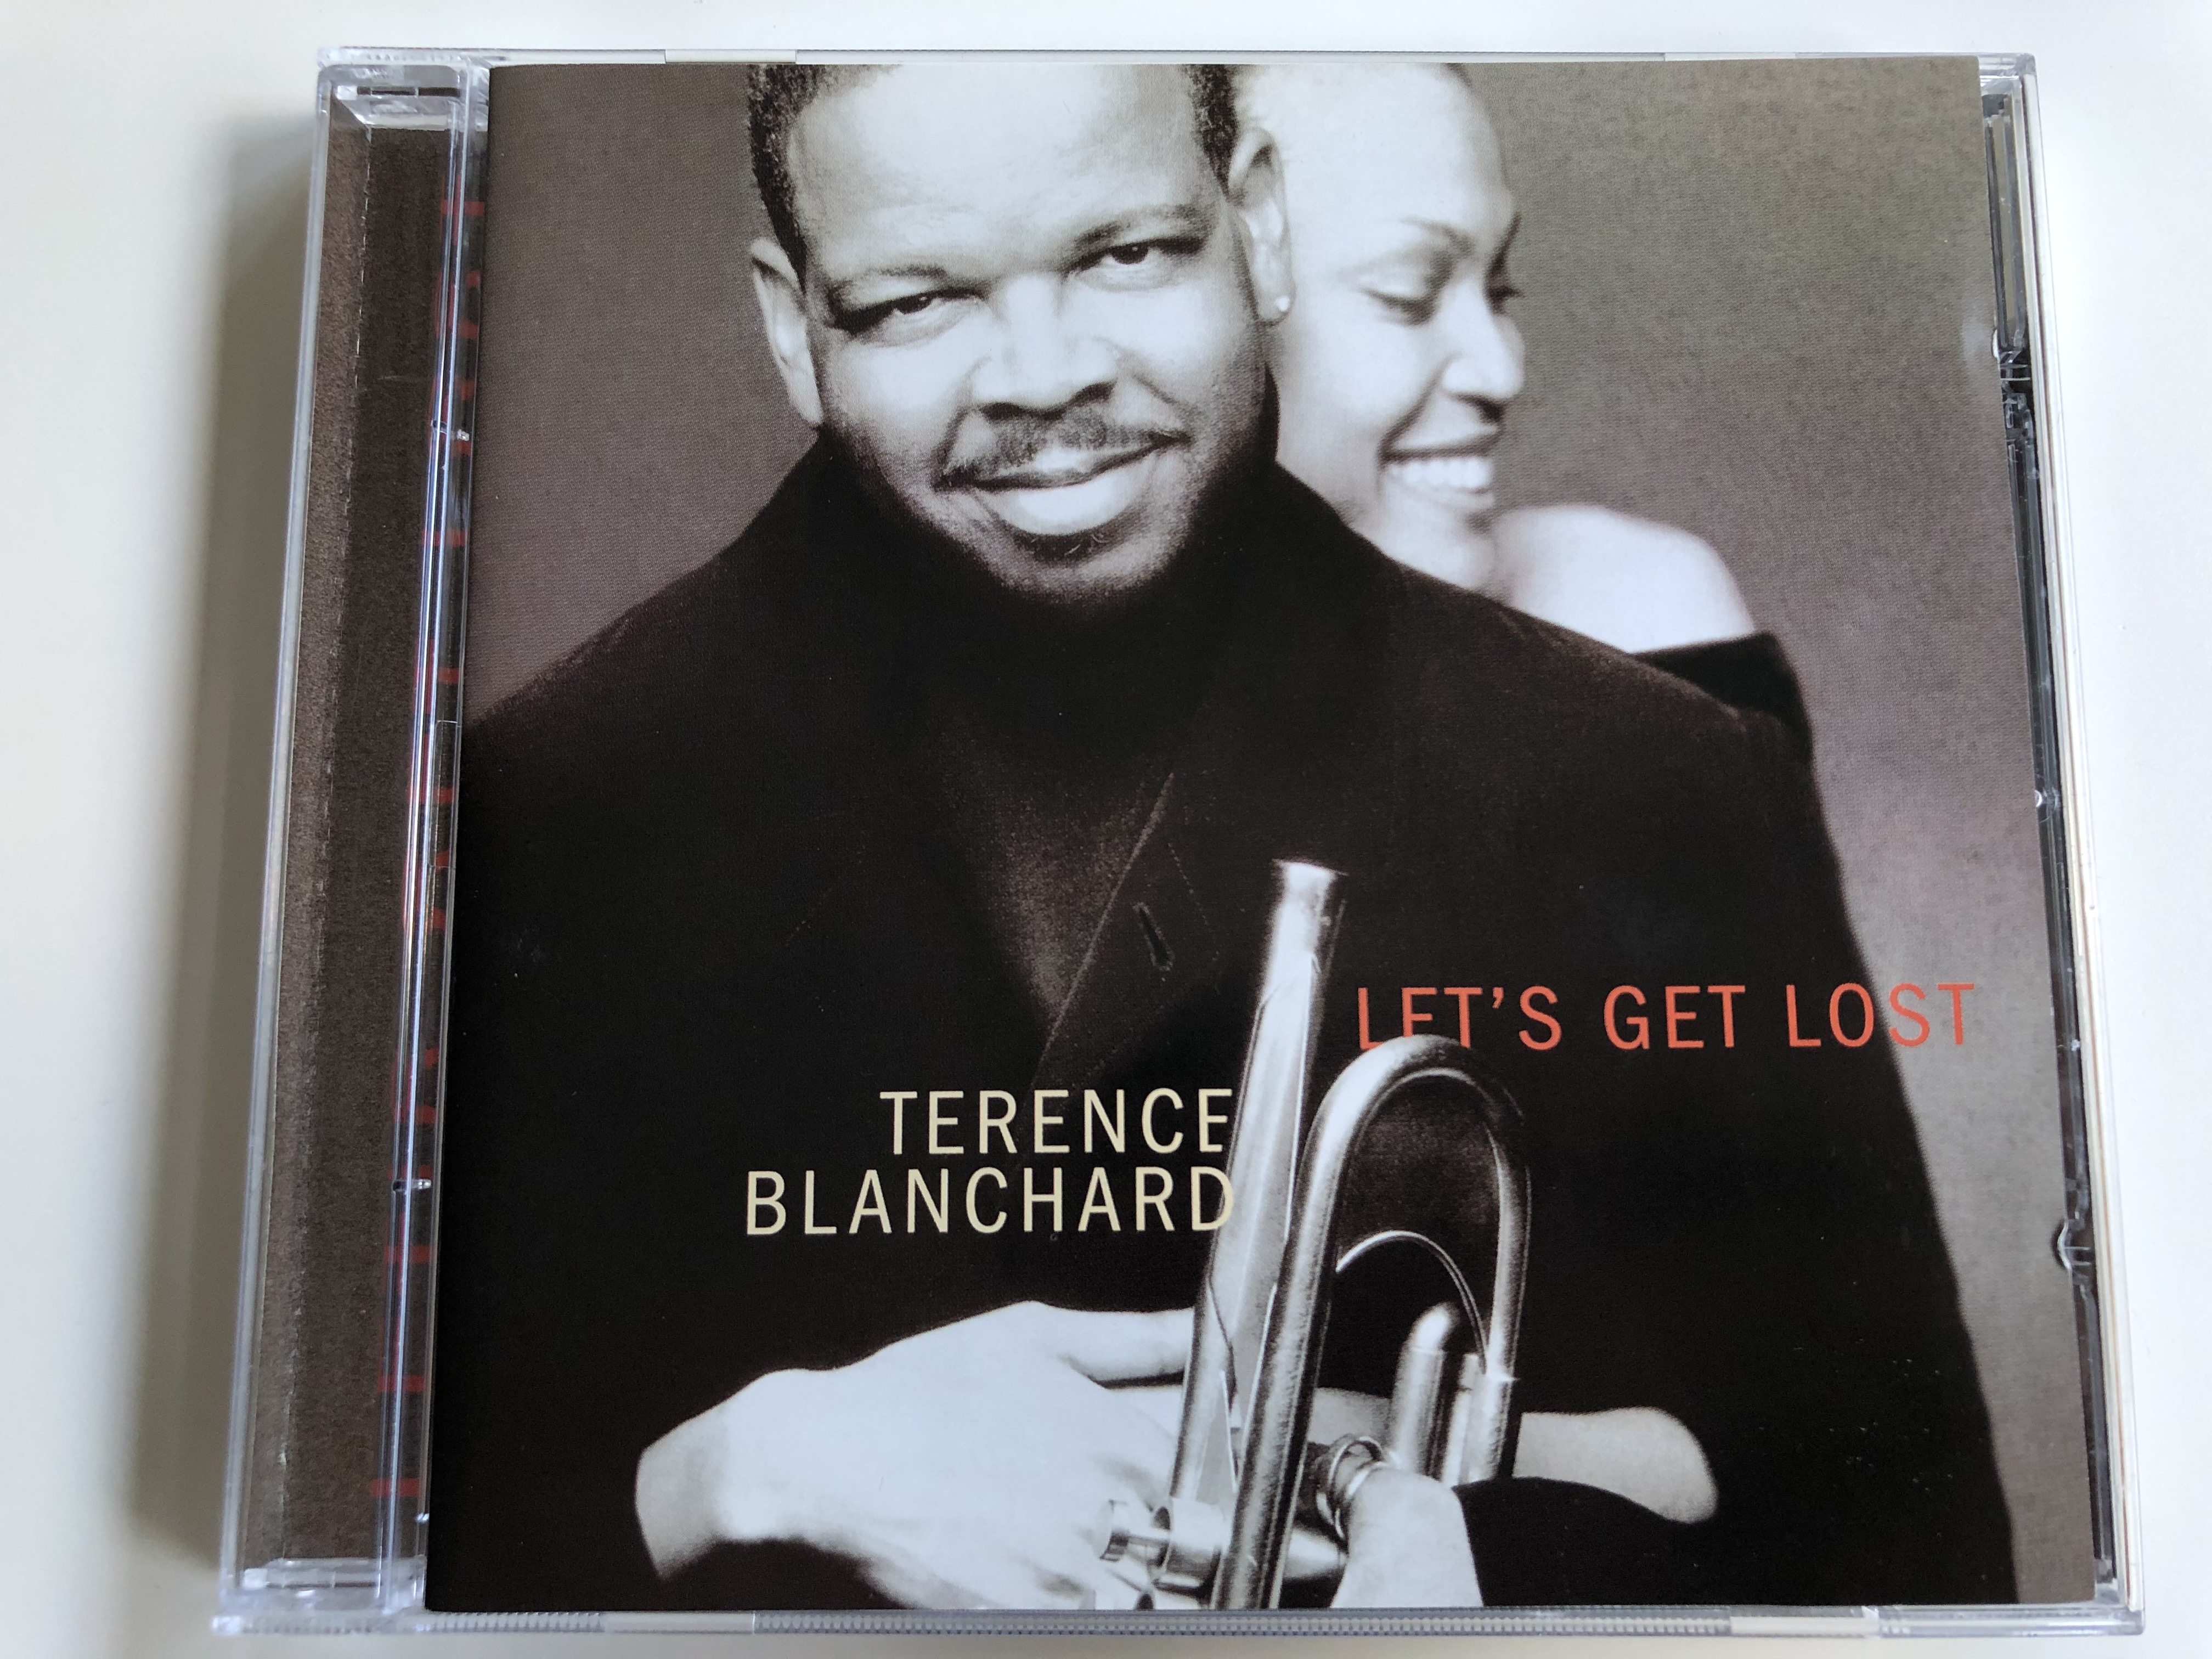 terence-blanchard-let-s-get-lost-sony-classical-audio-cd-2001-sk-89607-1-.jpg